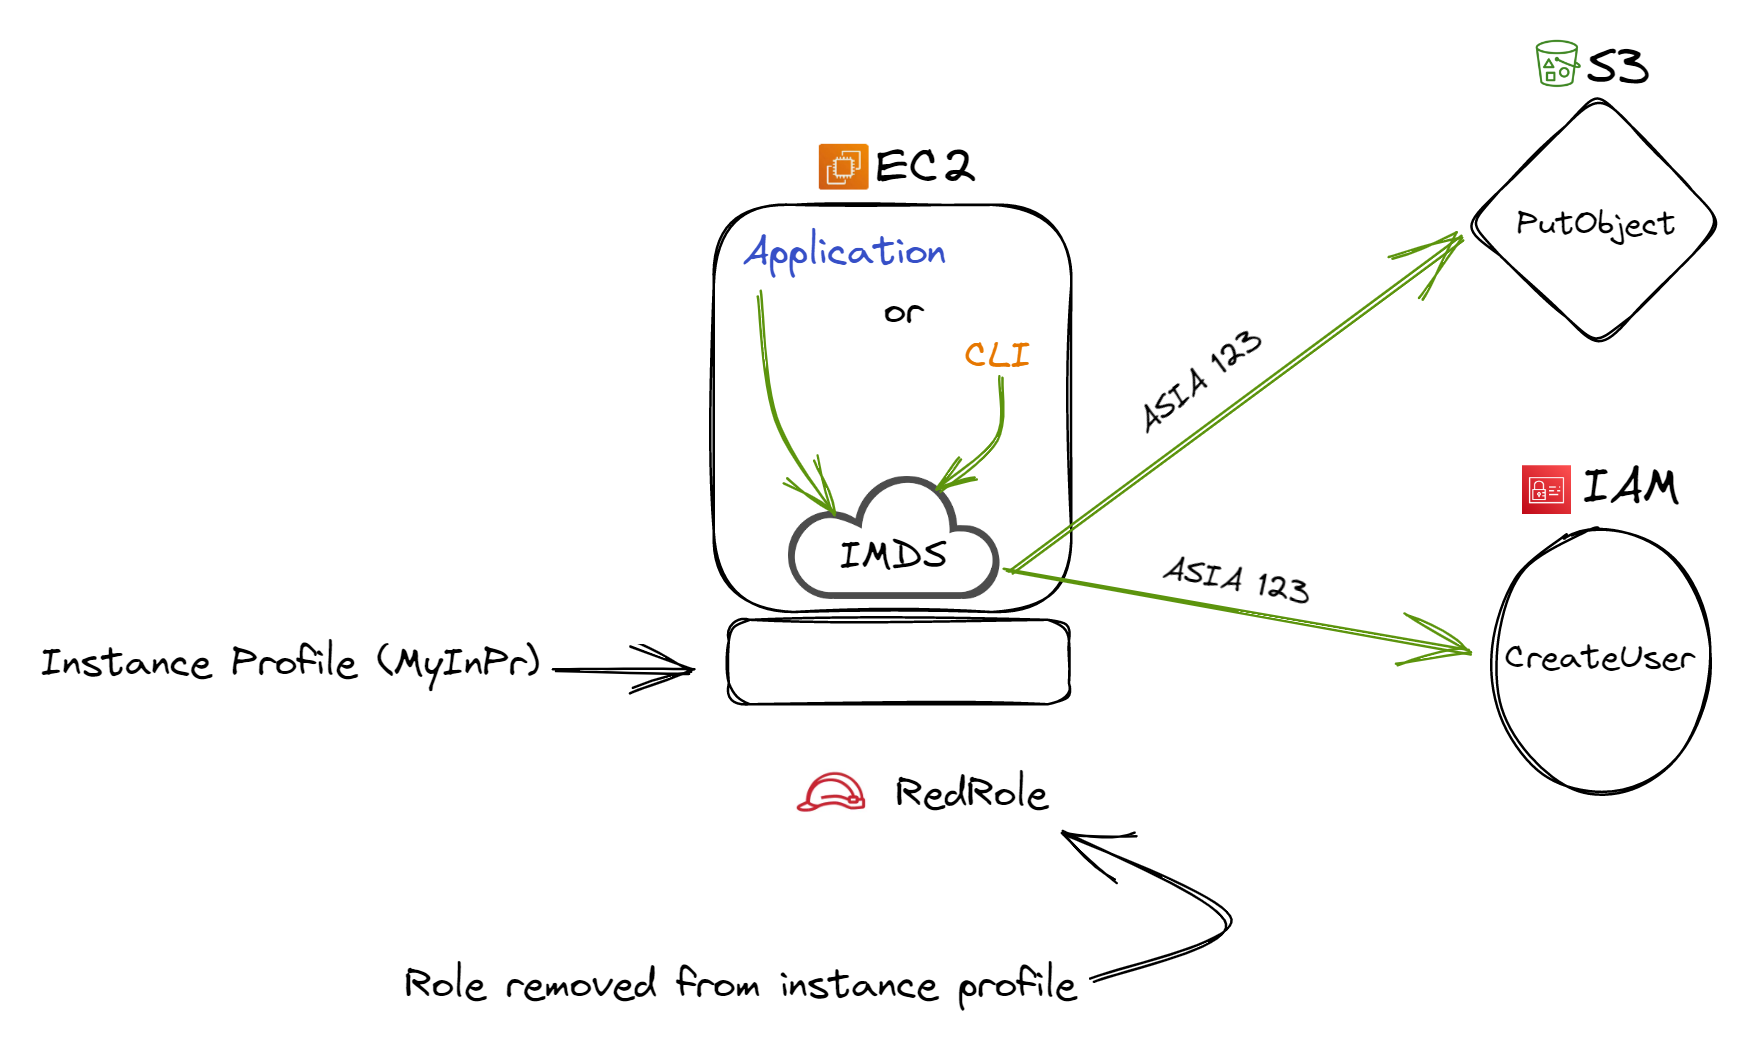 Figure 2: Role removed from AWS instance profile